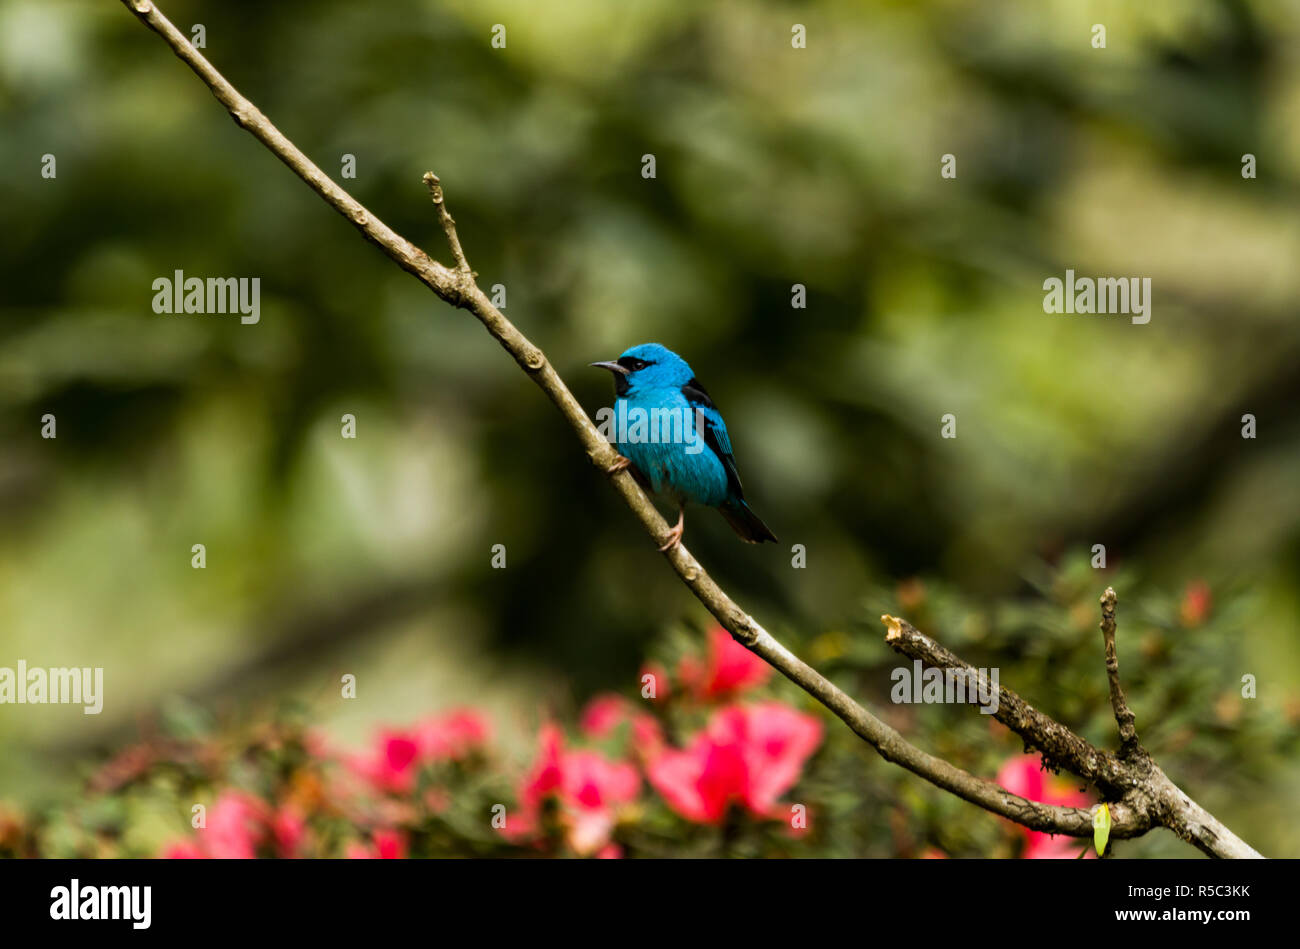 Blue bird perched on trunk Stock Photo